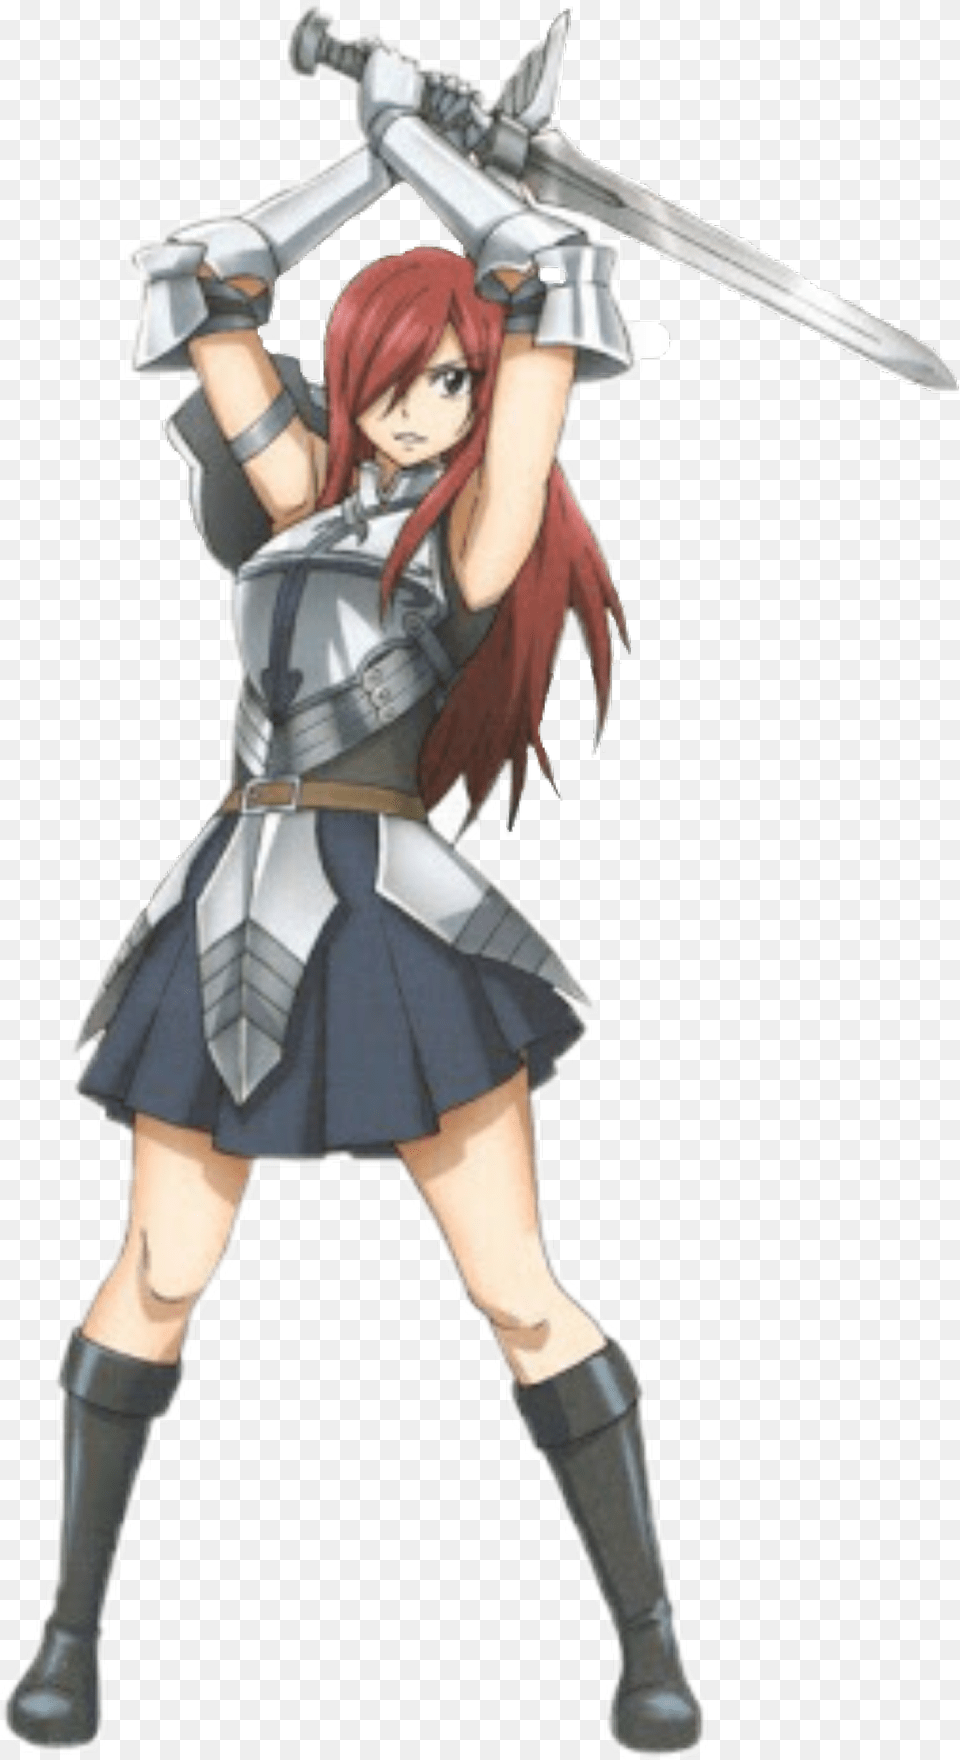 Fairytail Fairy Tail Fairytailanime Fairy Tail Erza Scarlet Normal Armor, Book, Clothing, Comics, Costume Free Png Download